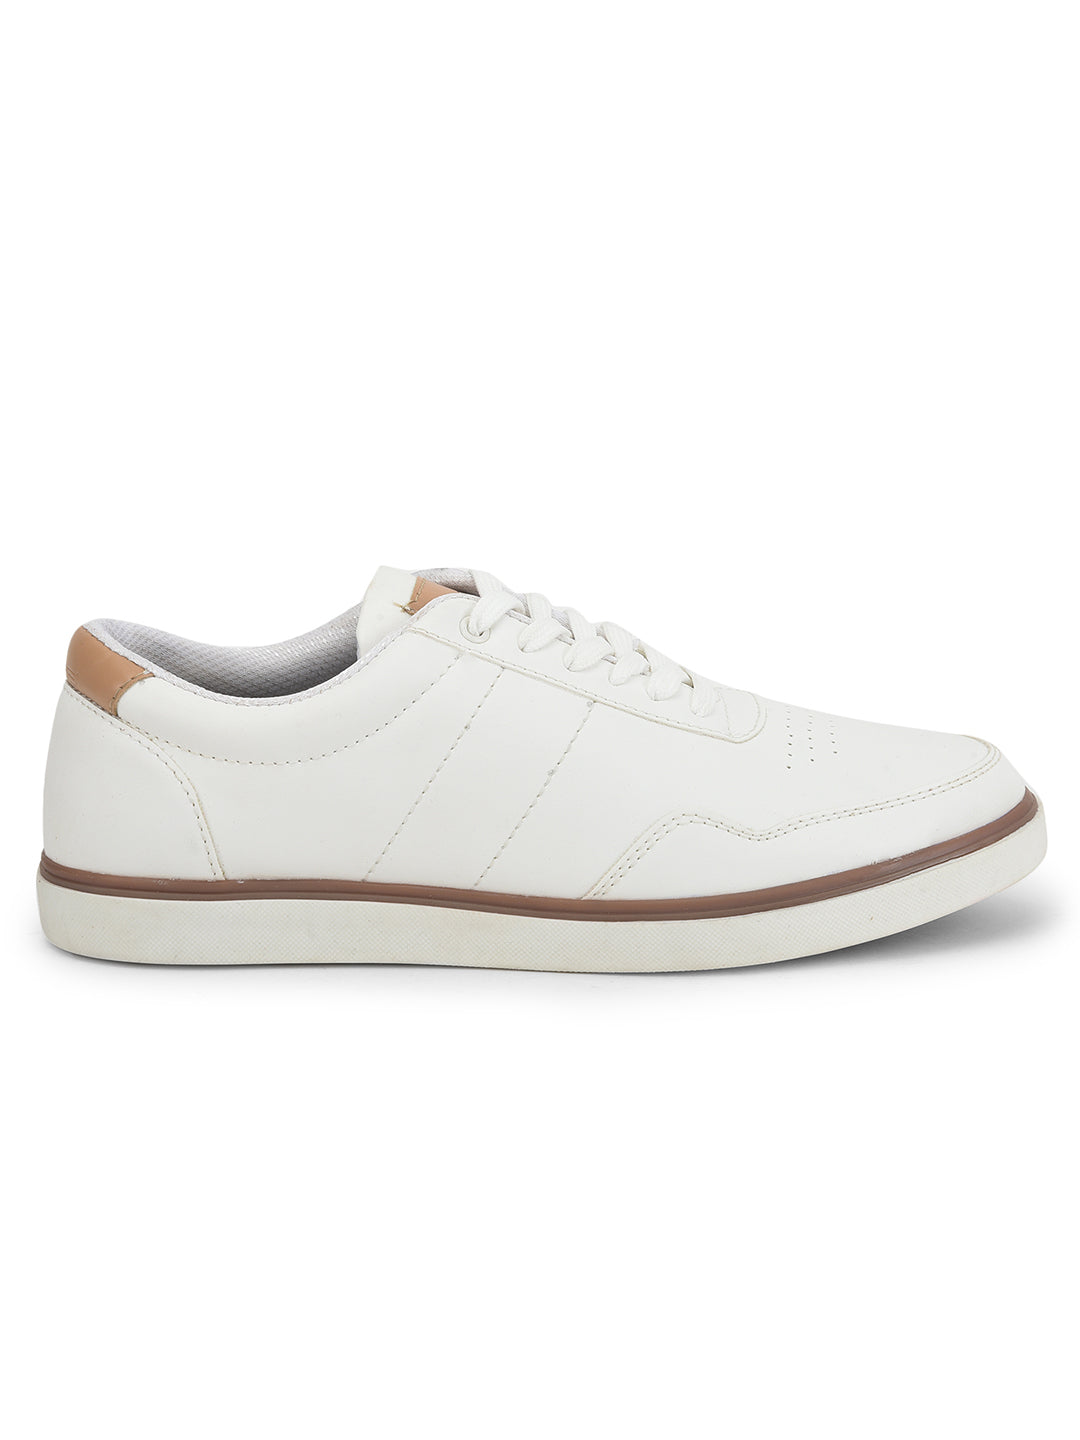 Cobb Mens White Sneakers Shoes